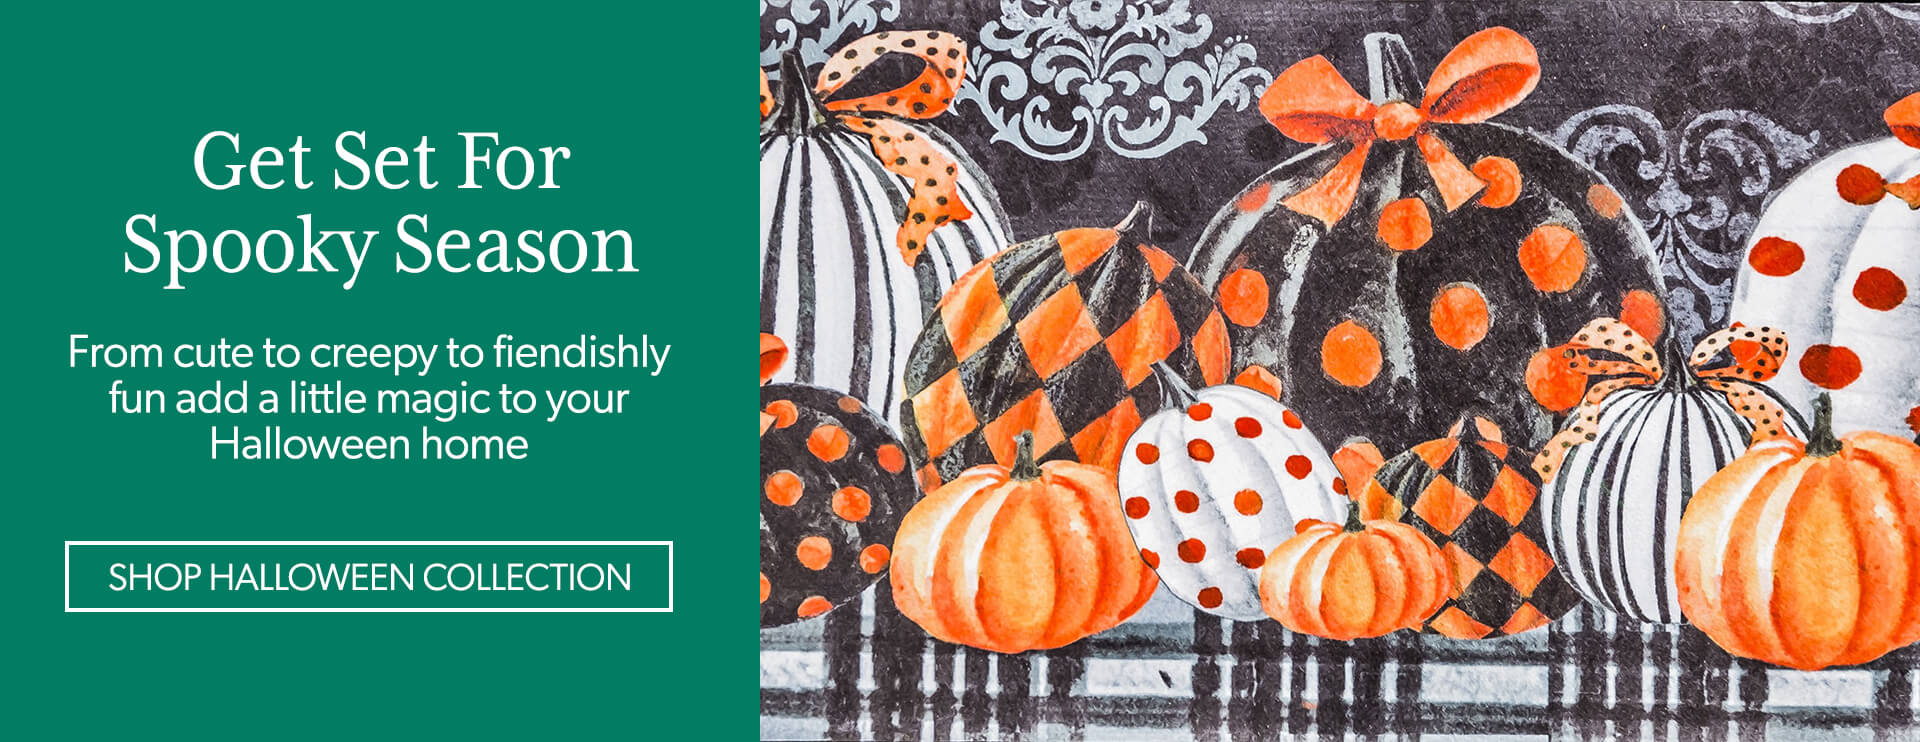 Get Set For Spooky Season. From cute to creepy to fiendishly fun add a little magic to your Halloween home